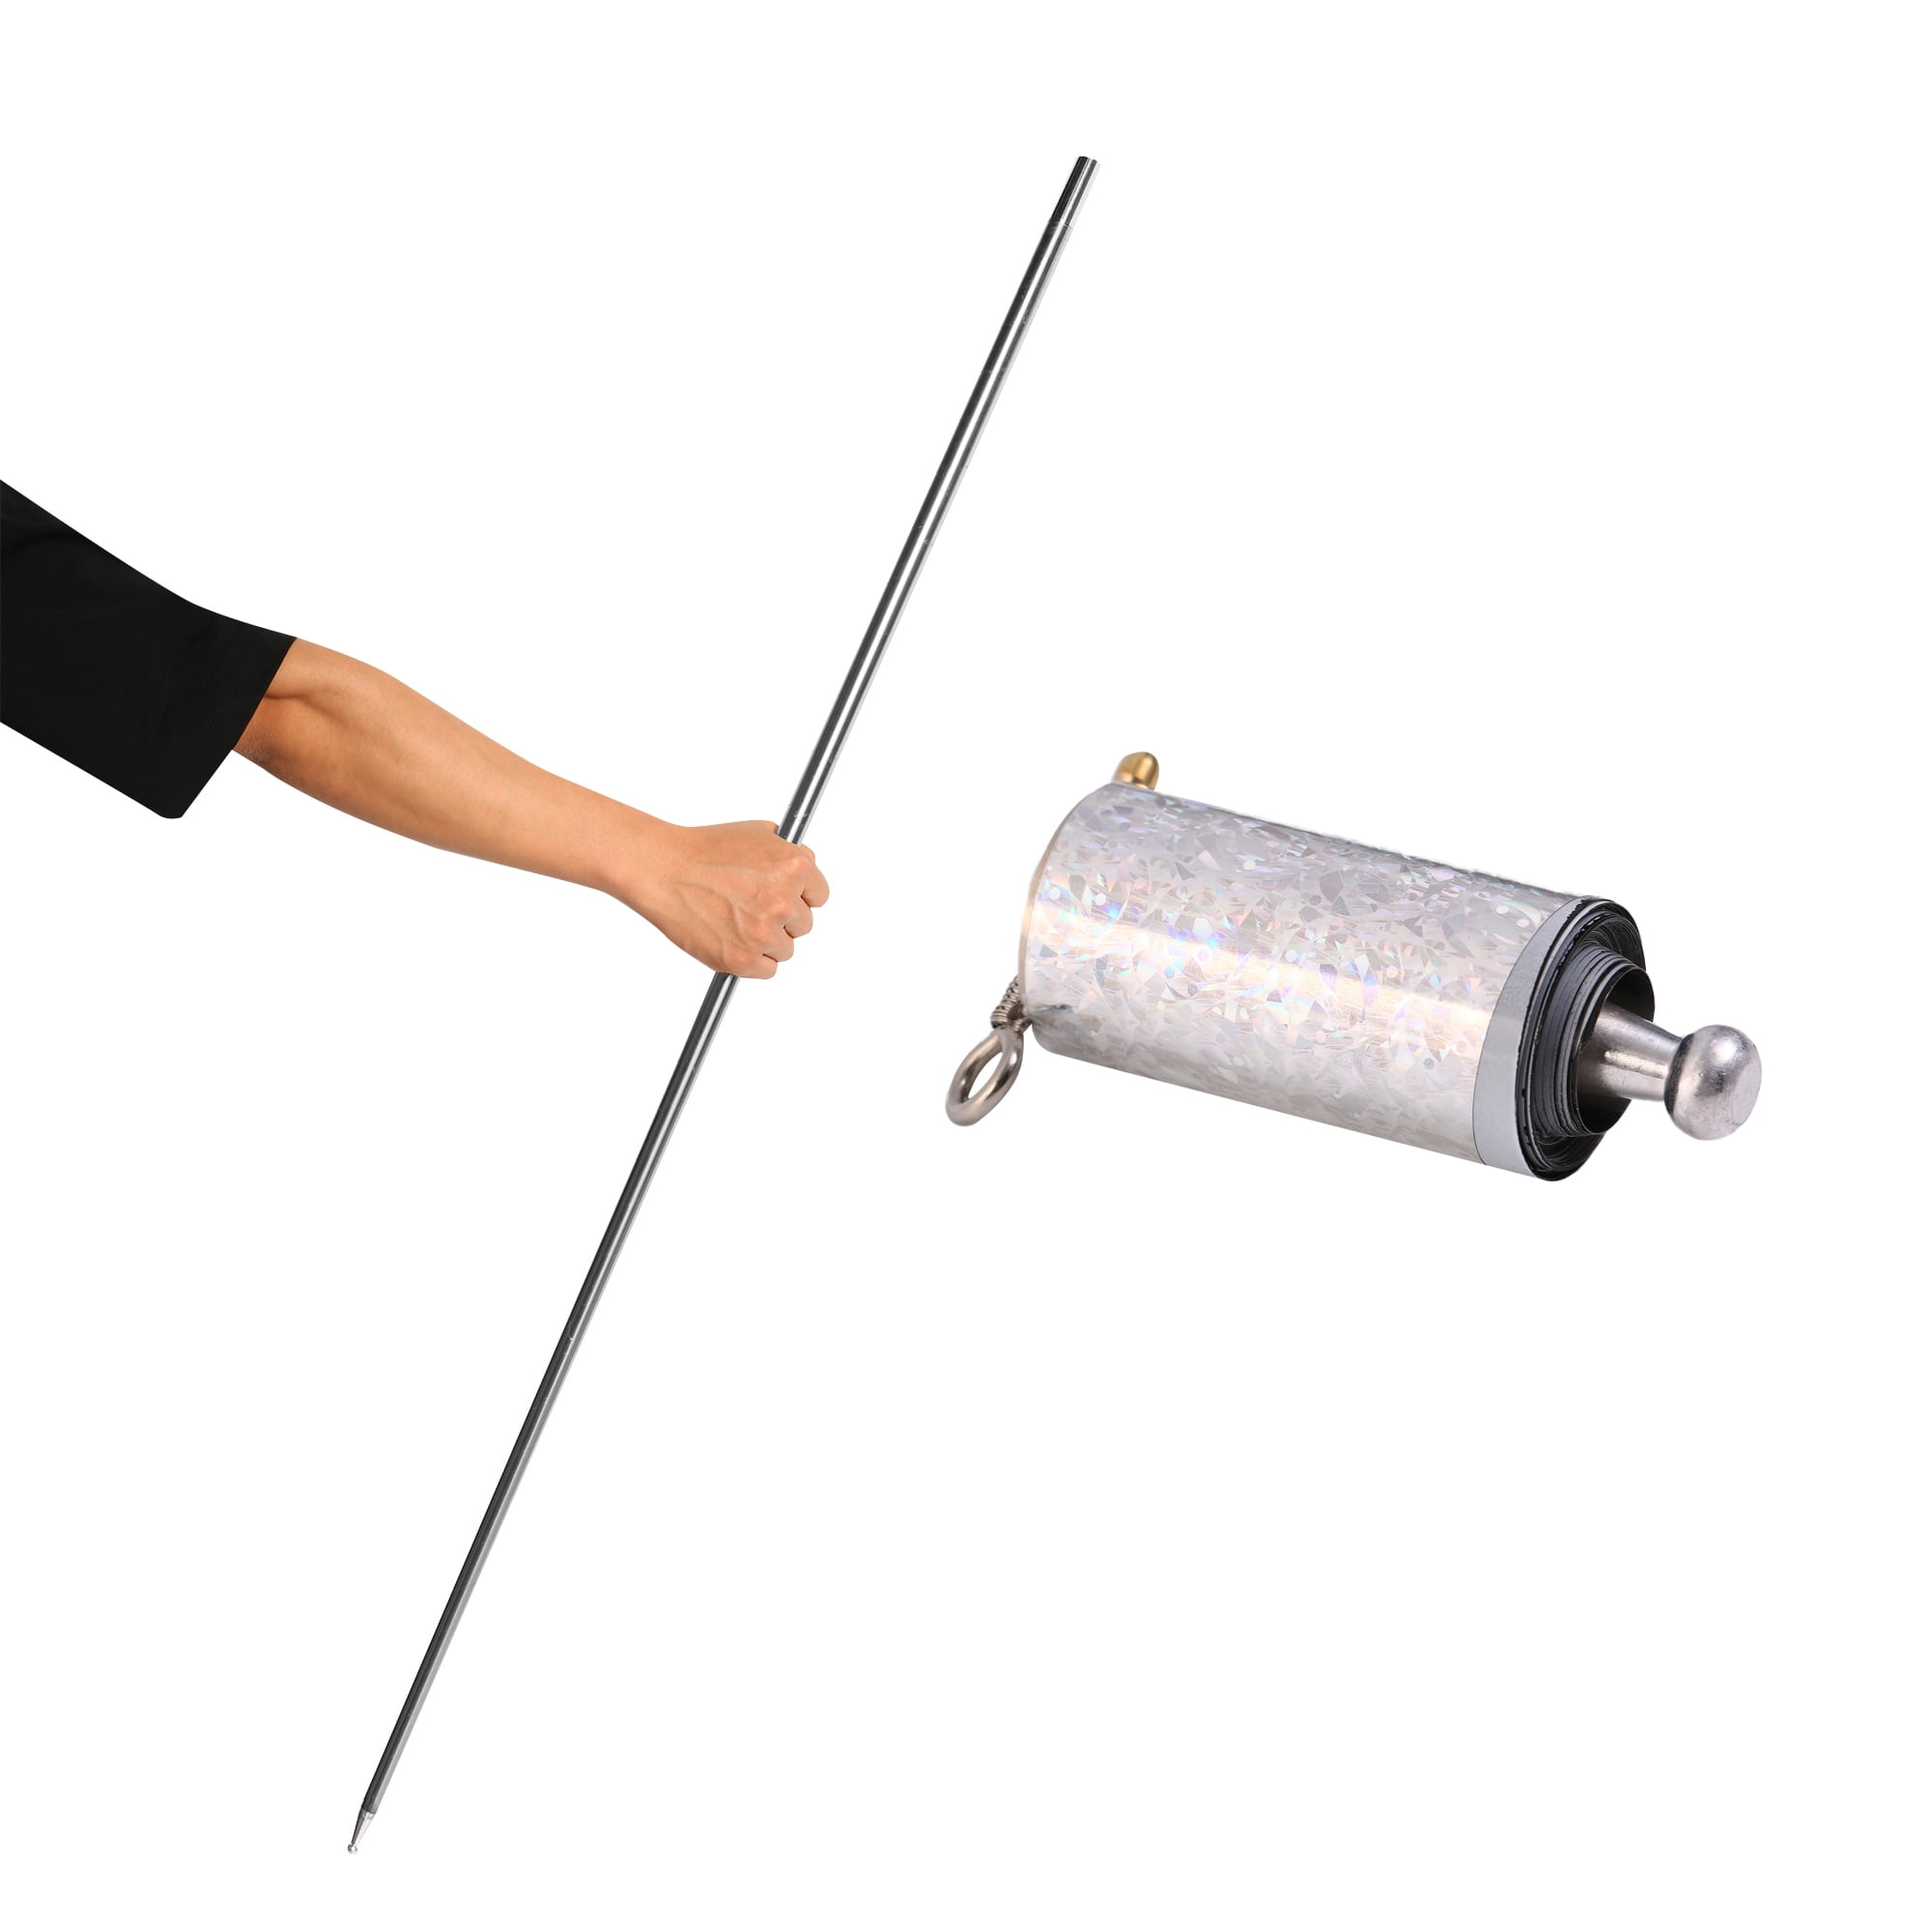 Silver Metal Appearing Cane Wand Stick Stage Magic Trick Gimmick ILLUSION 